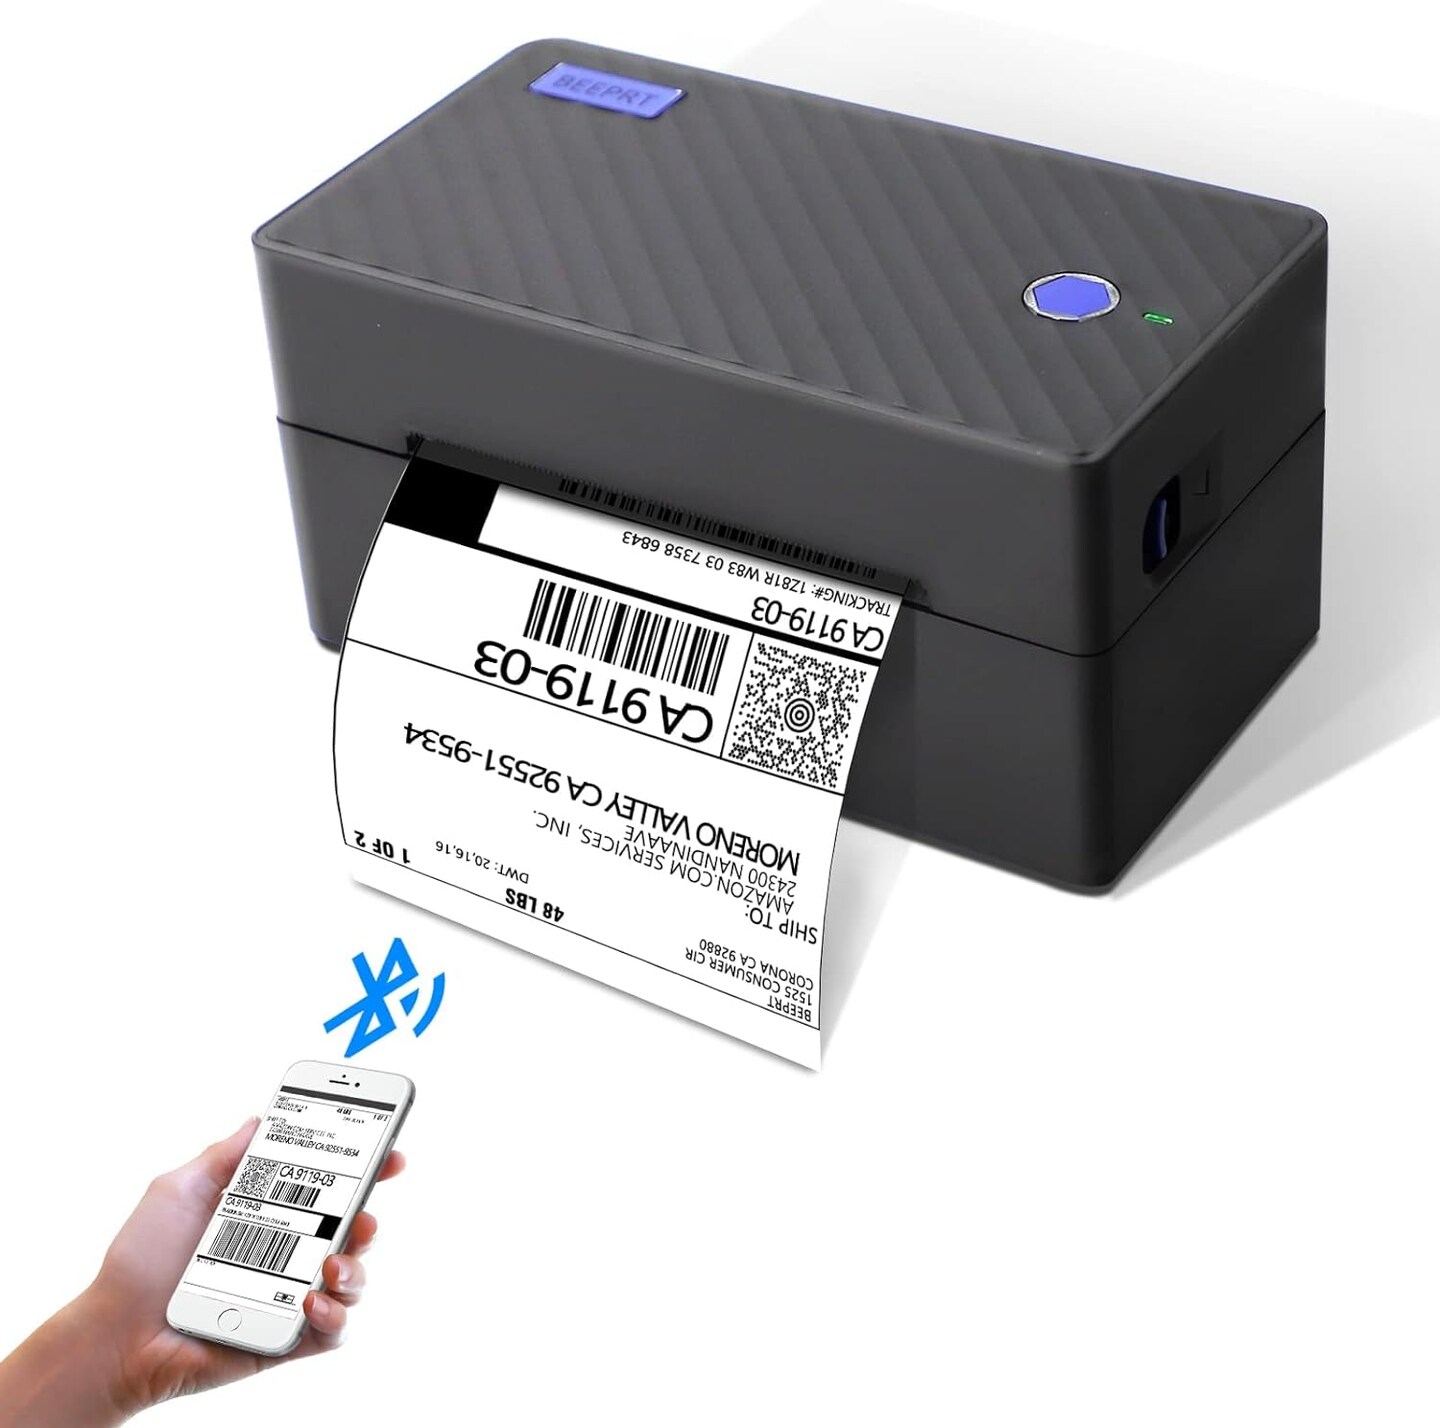 Beeprt&#xAE; Bluetooth Shipping Label Printer for Shipping Package - 4x6 Label Printer